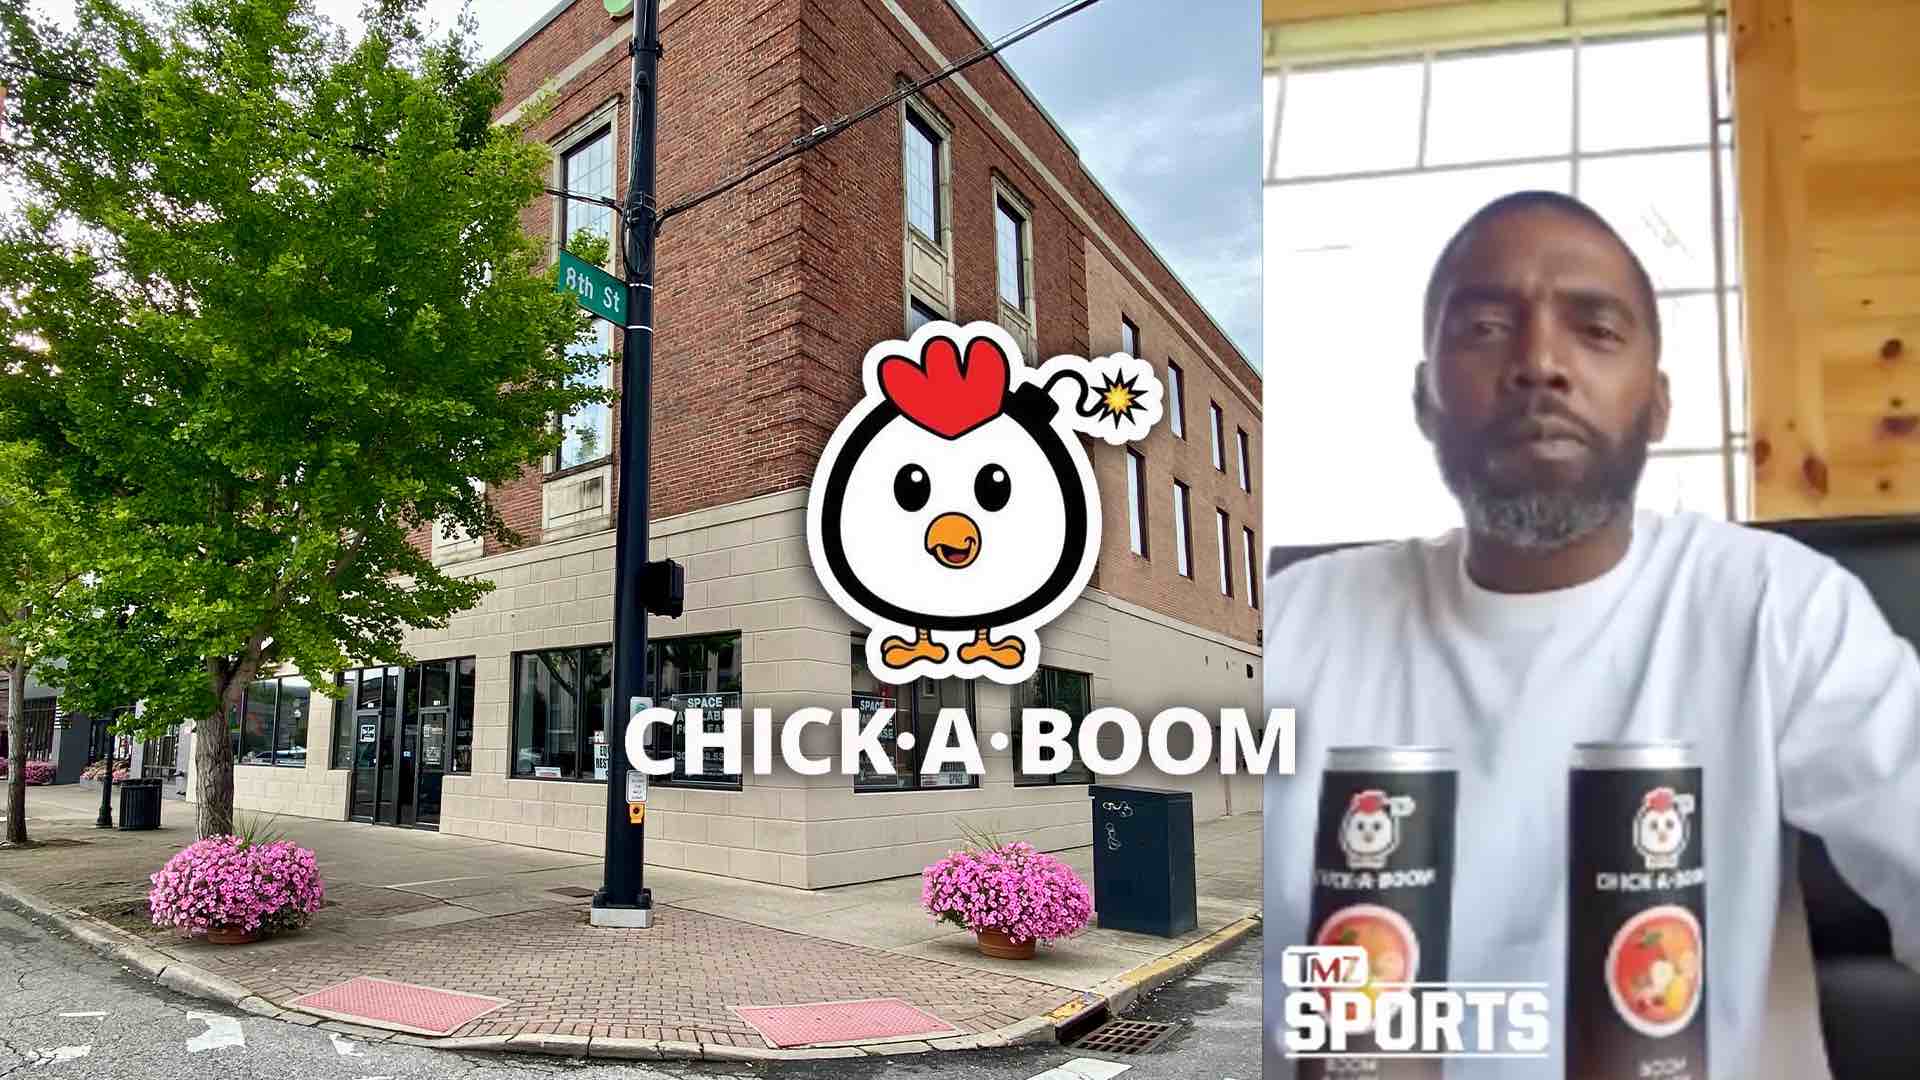 Randy Moss Brings “Chick-A-Boom” To Downtown Huntington